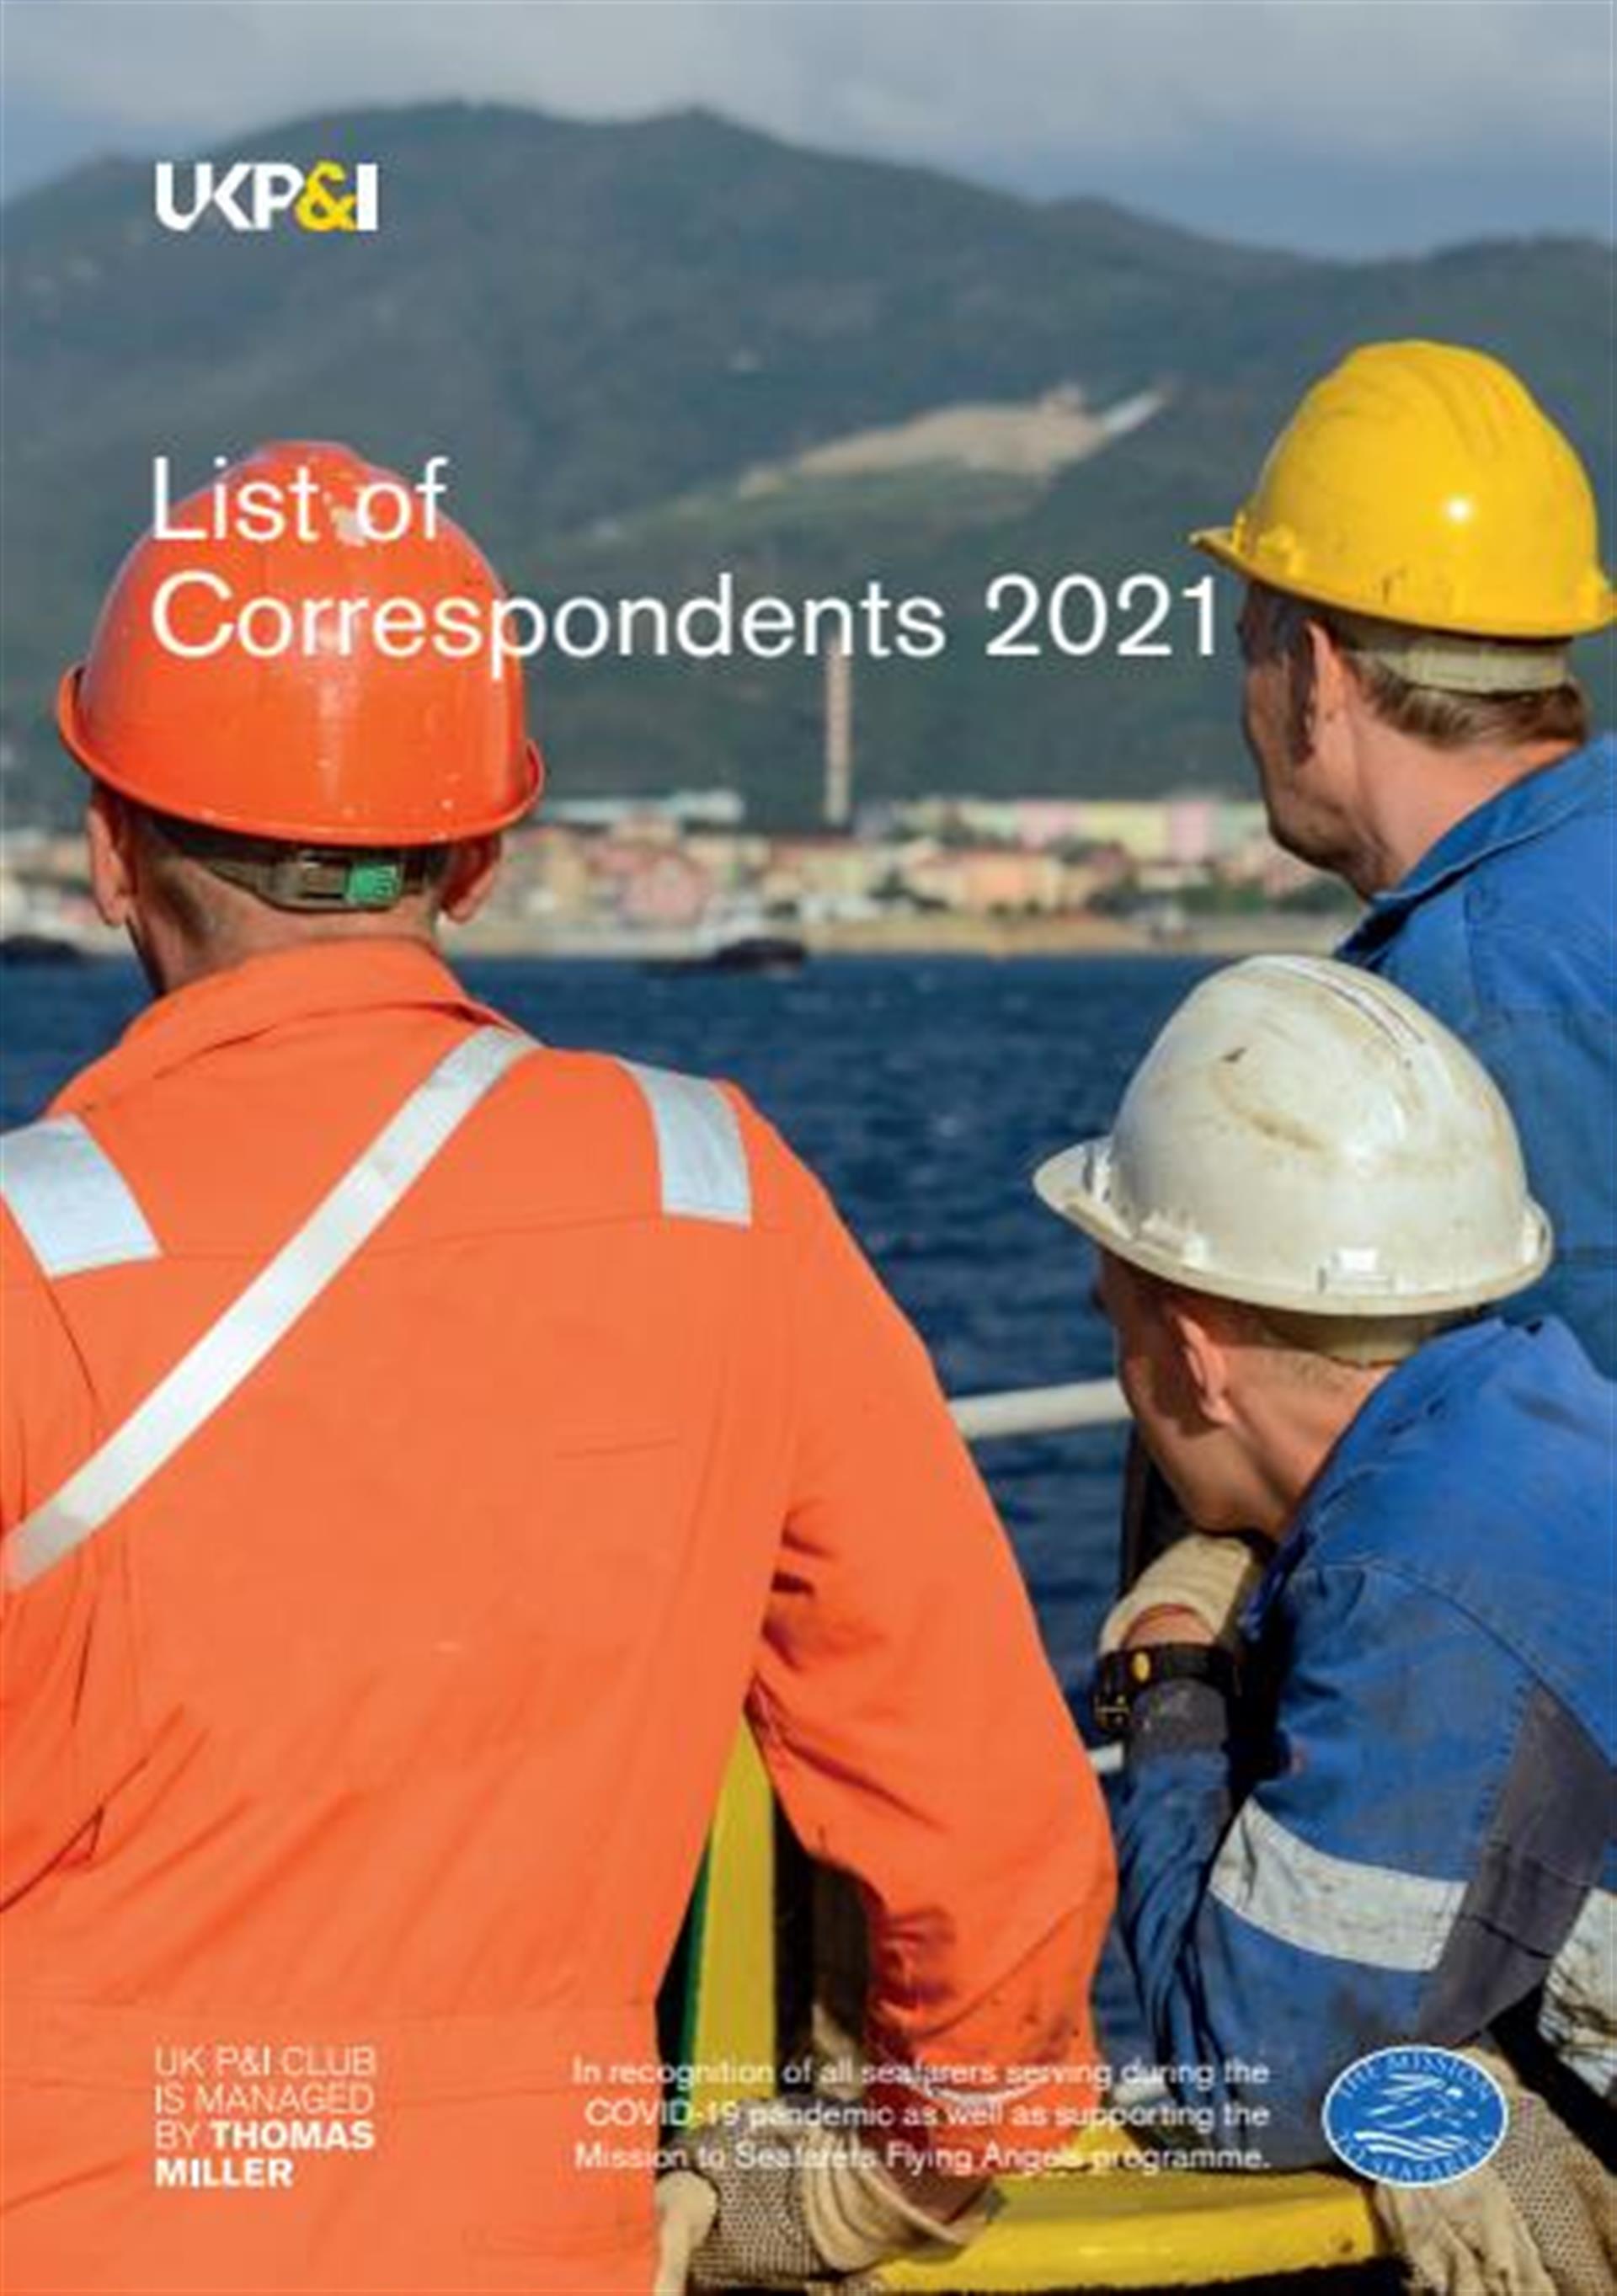 Club works with a network of global correspondents  - Shipowners